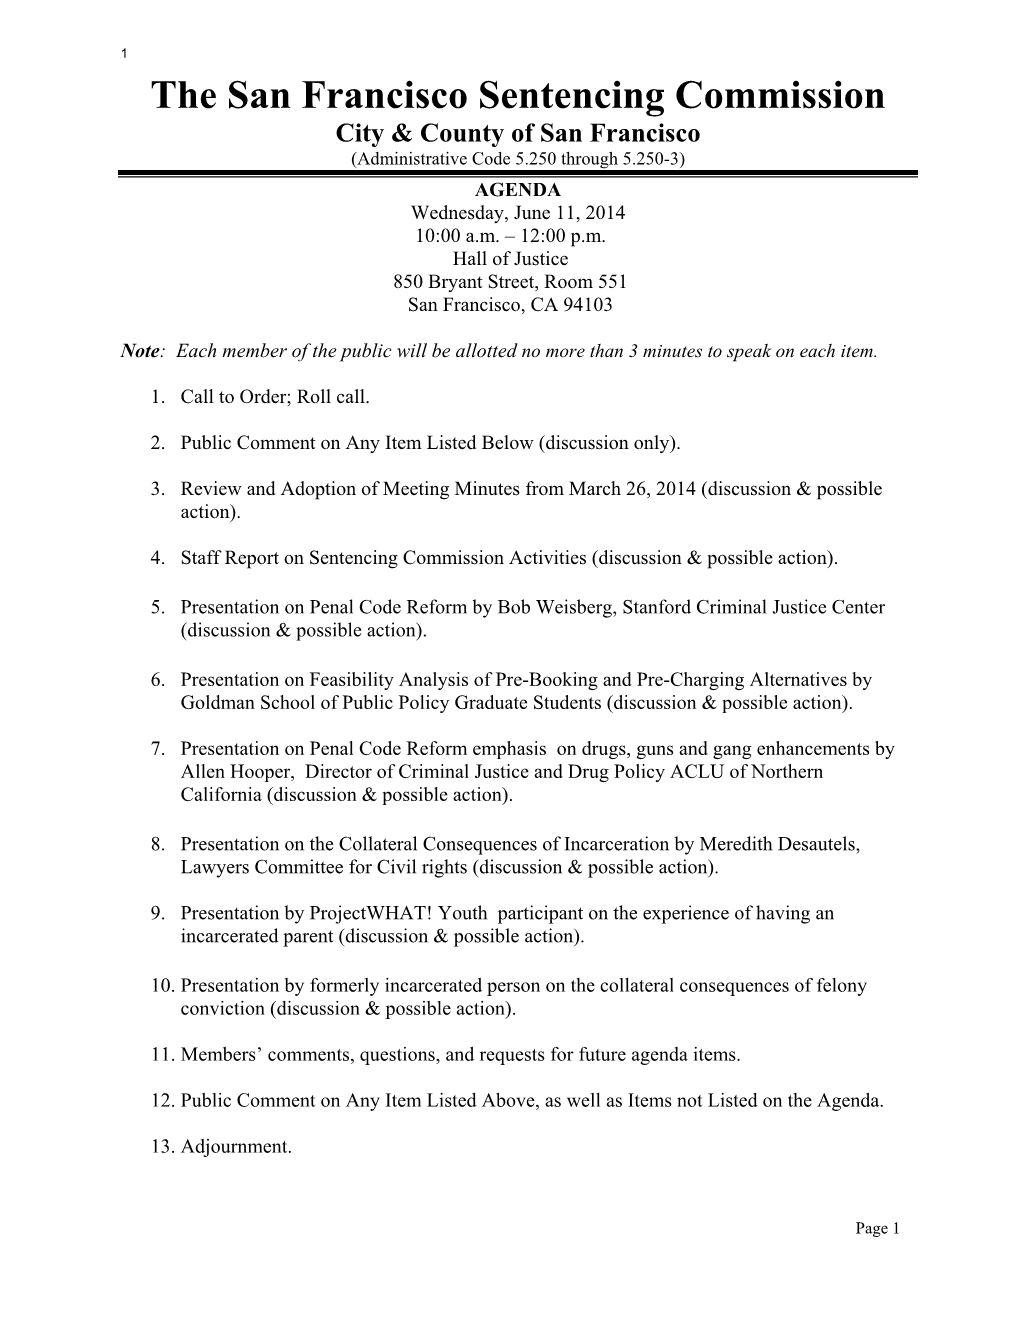 The San Francisco Sentencing Commission City & County of San Francisco (Administrative Code 5.250 Through 5.250-3) AGENDA Wednesday, June 11, 2014 10:00 A.M